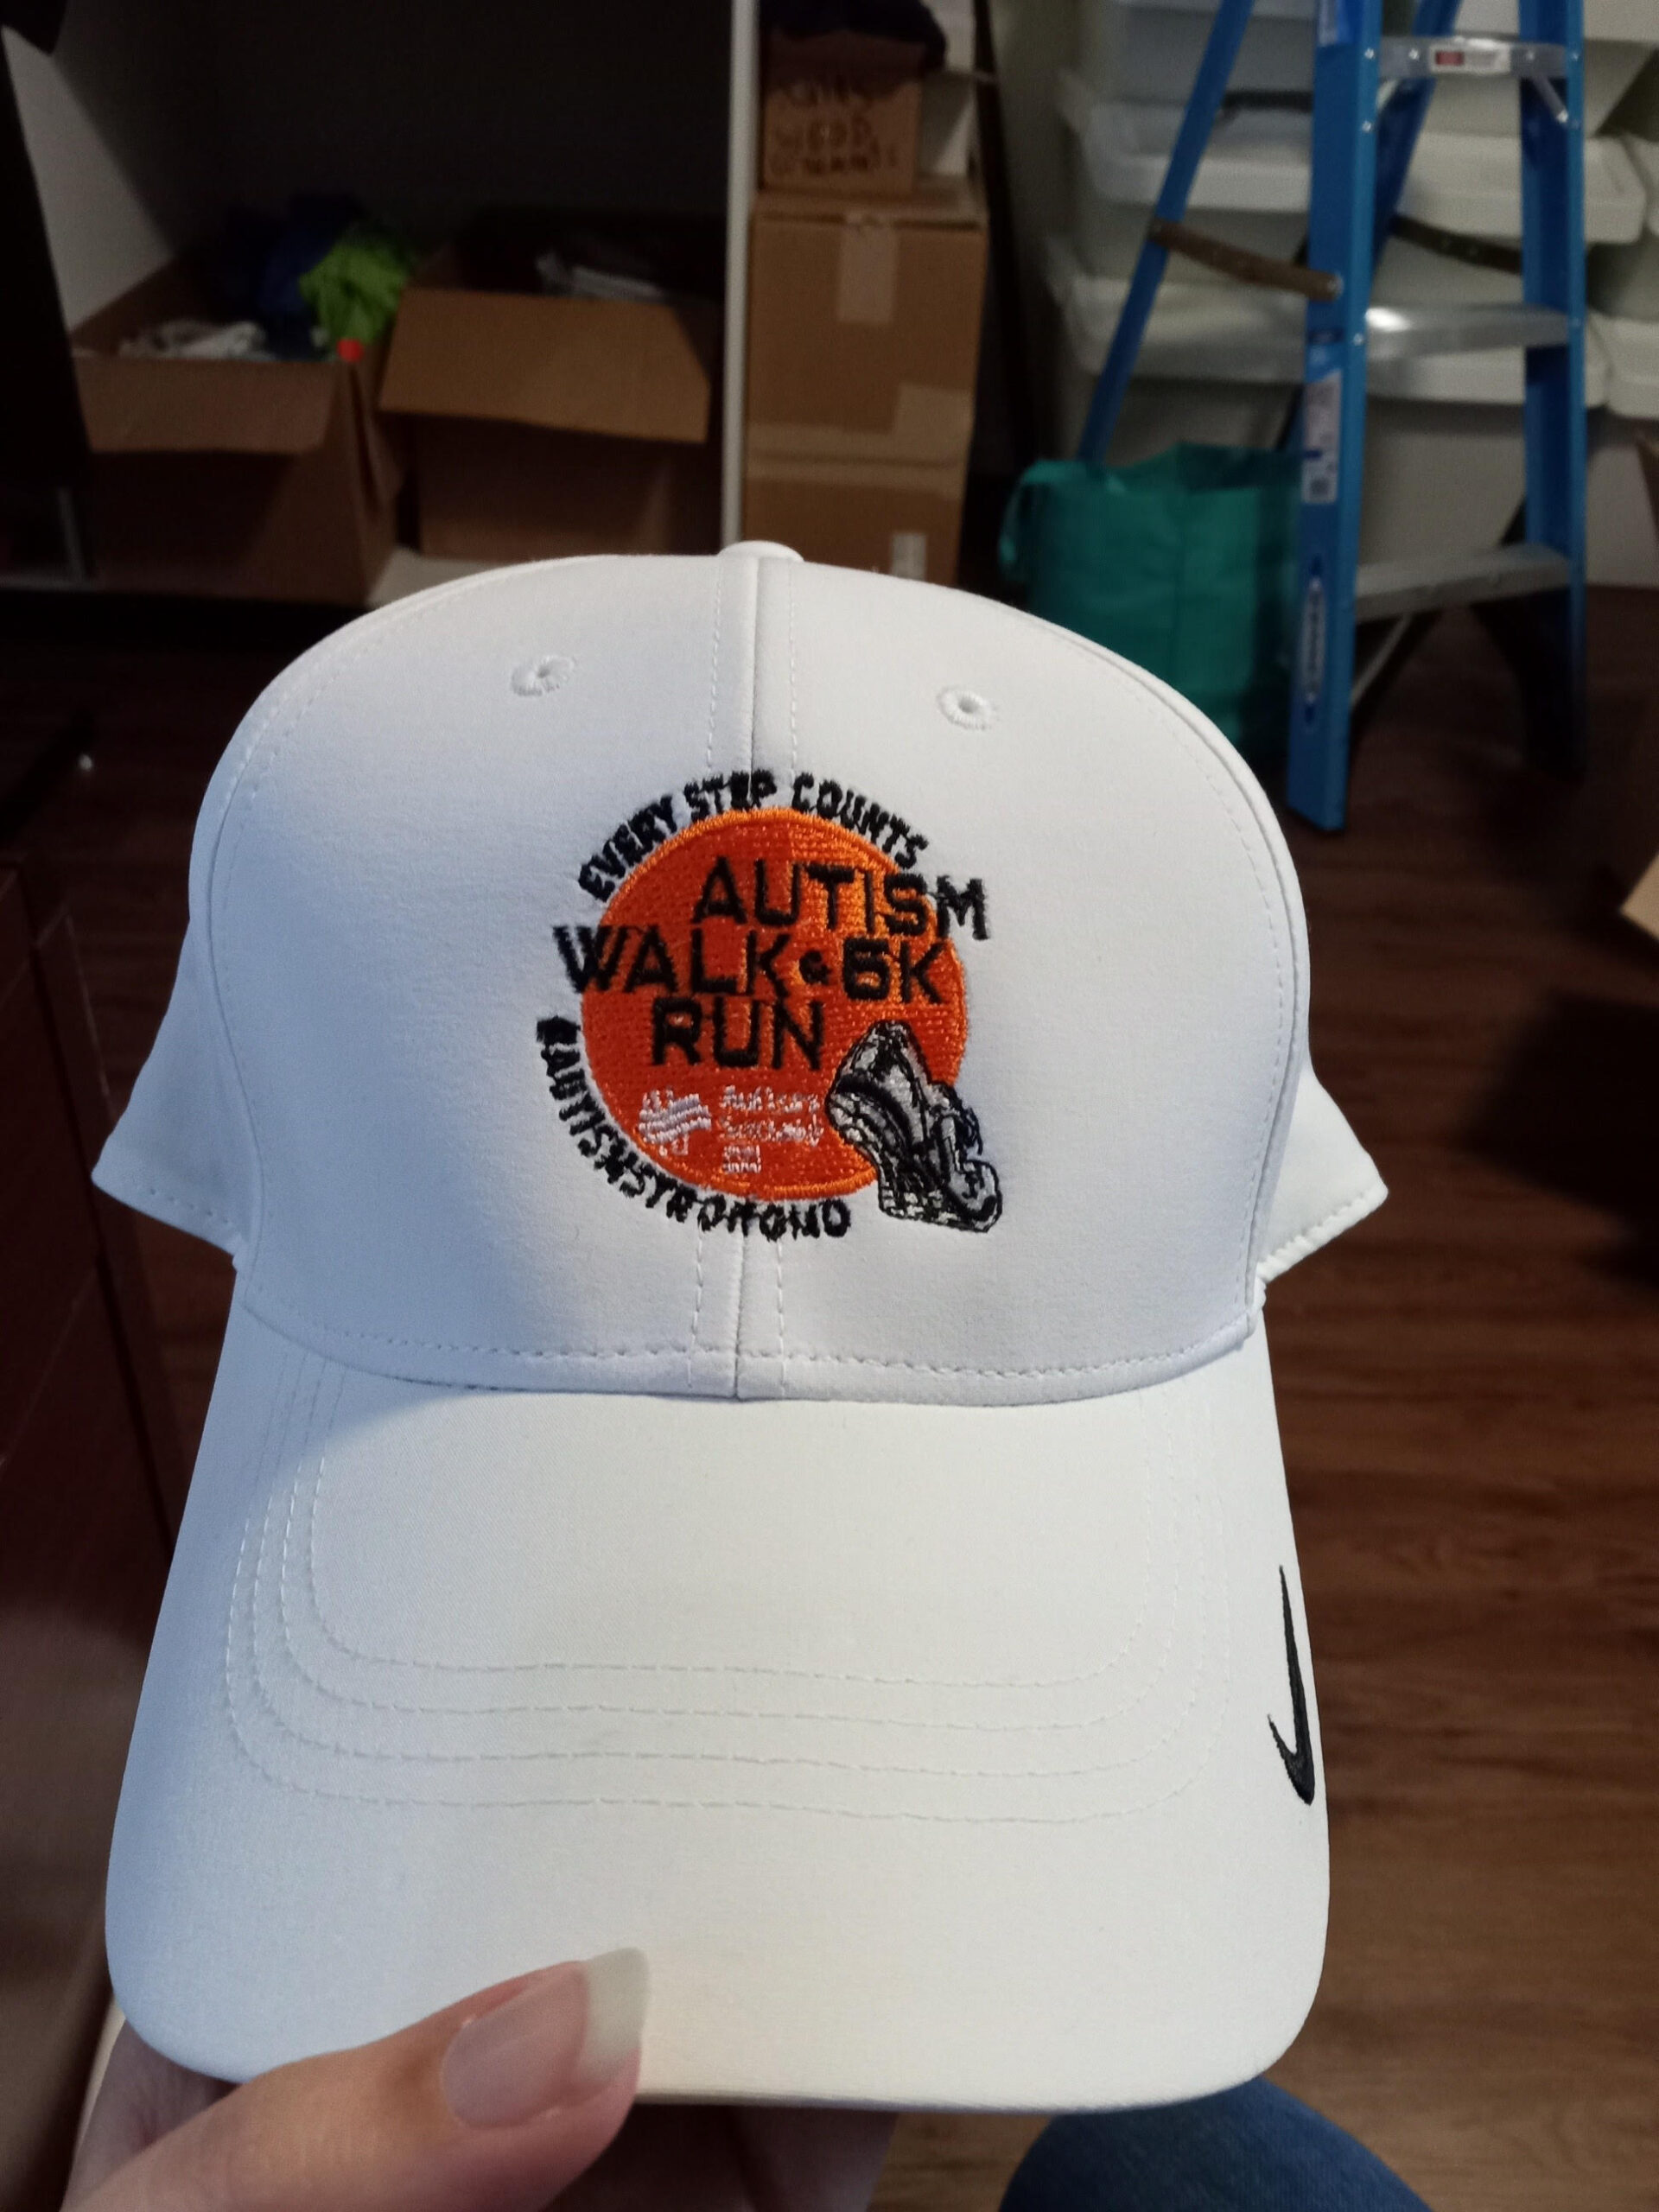 A white cap with a logo on it.